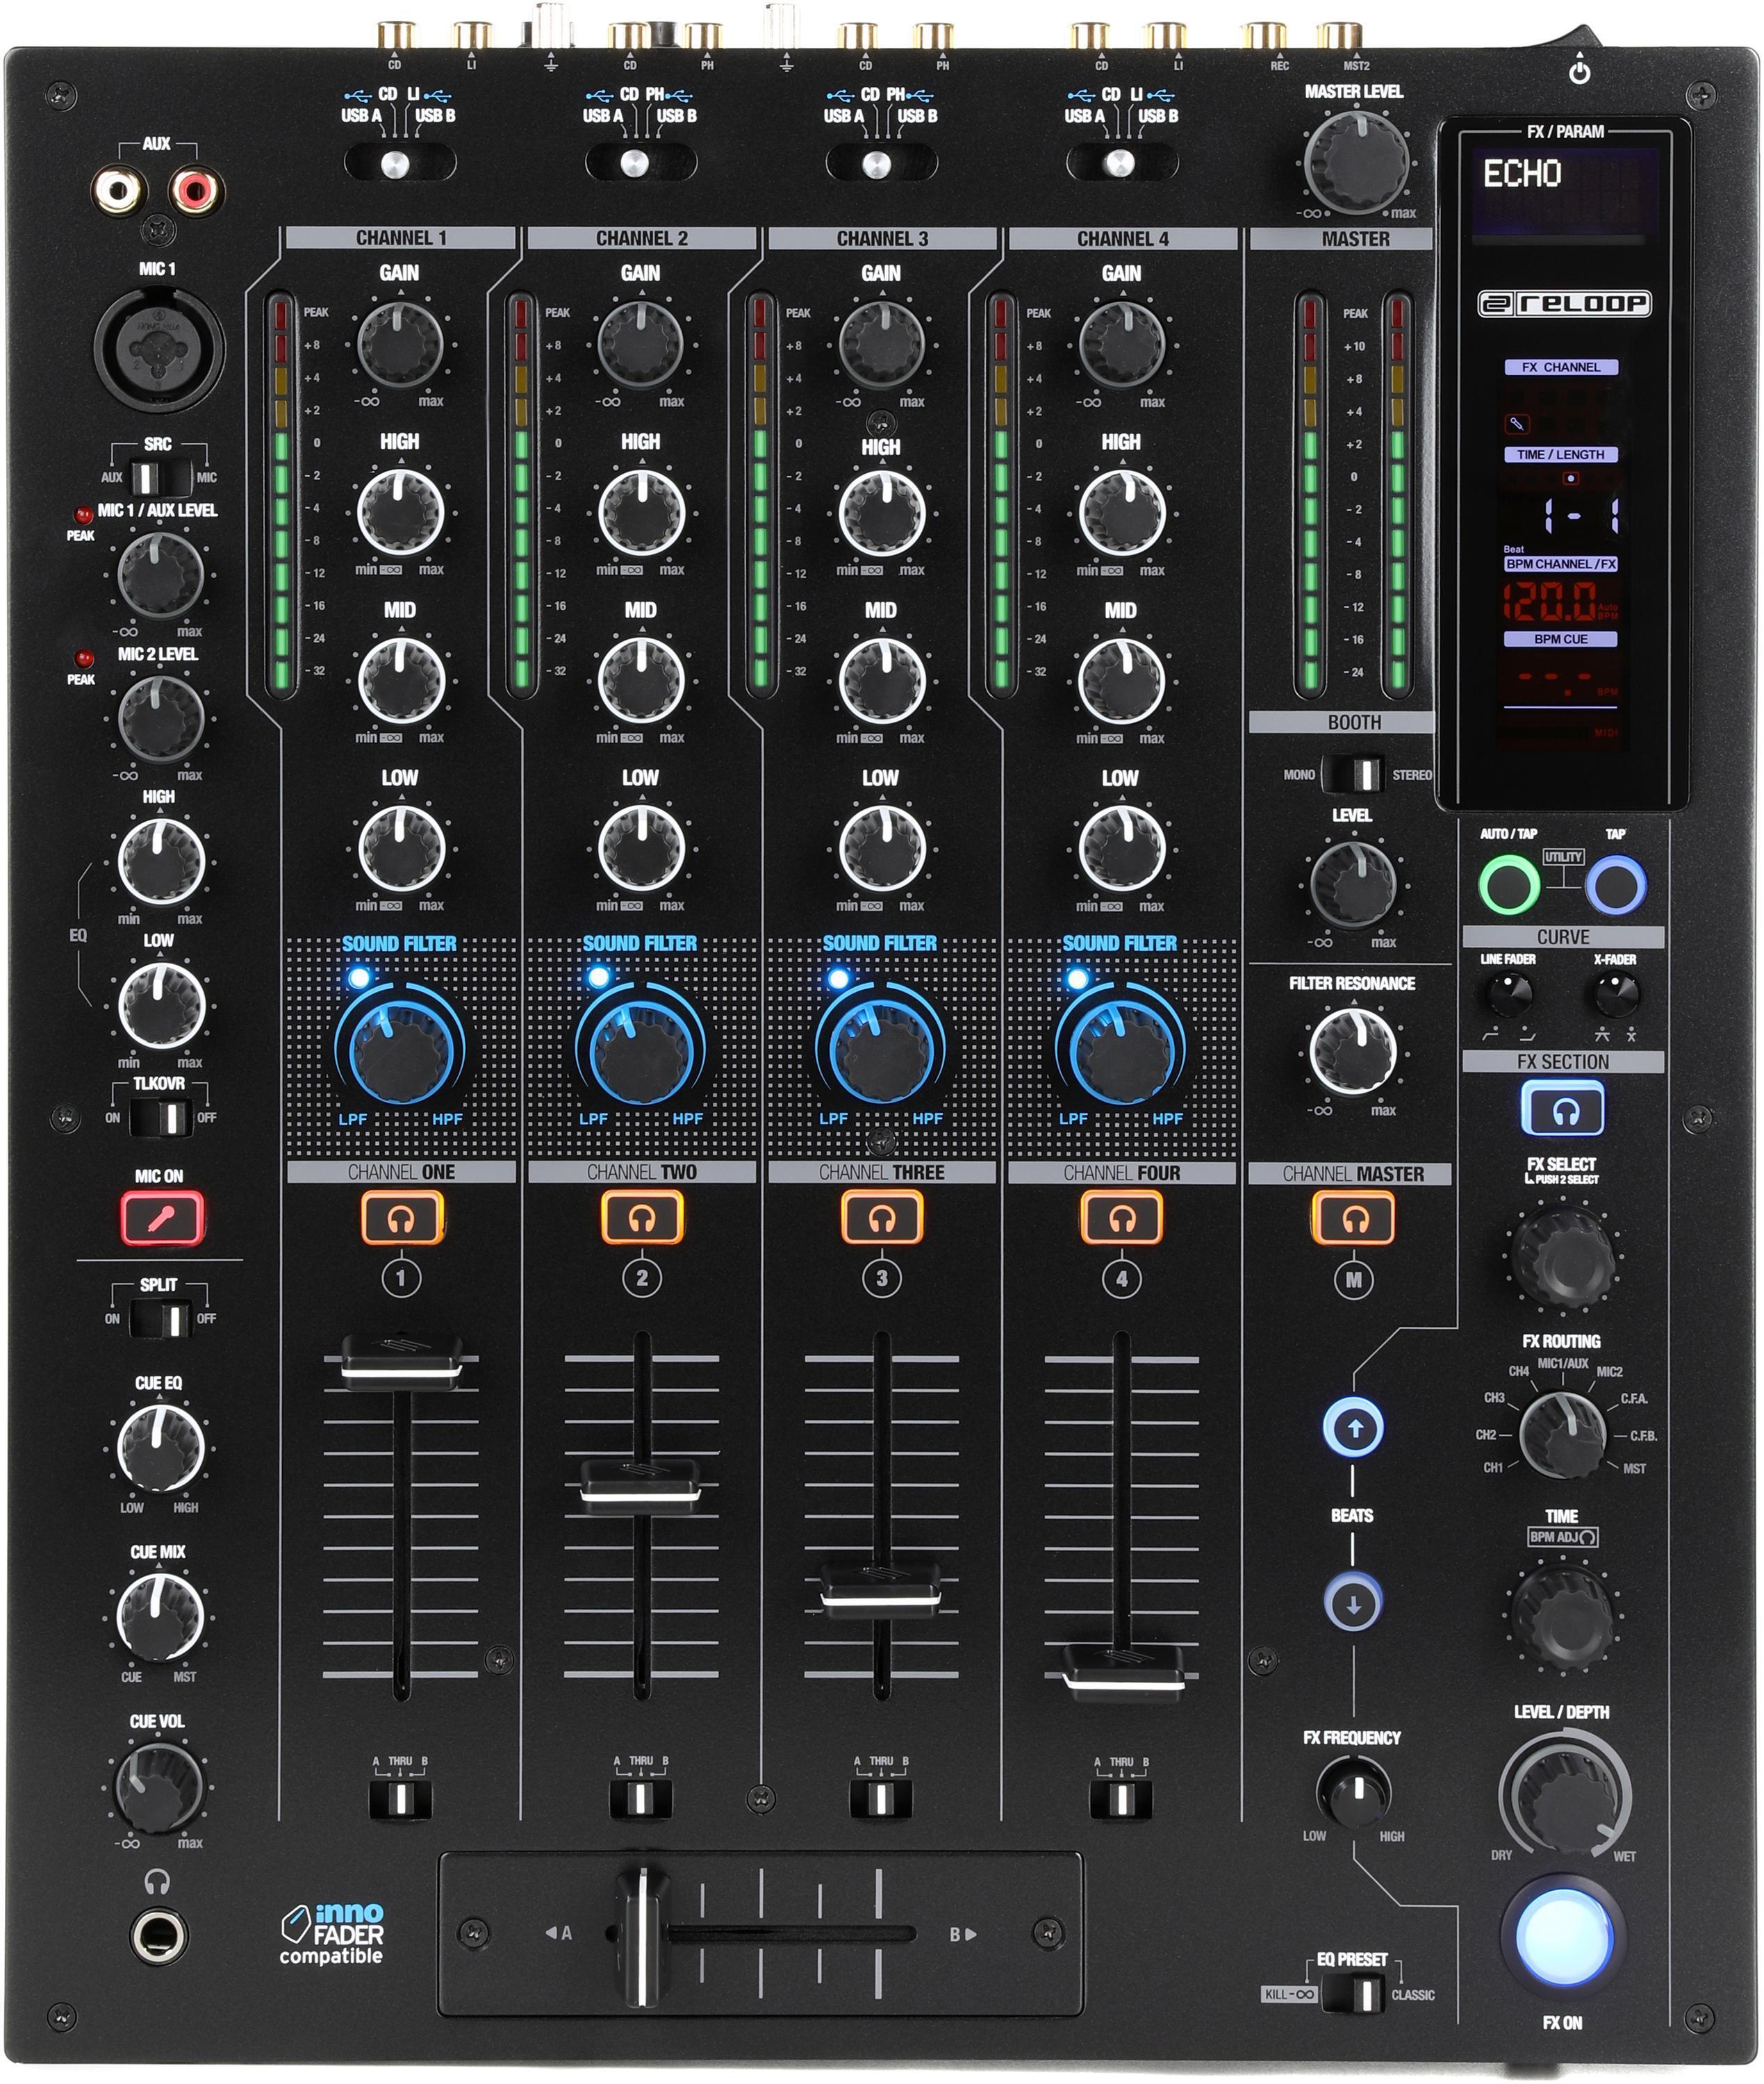 Reloop RMX-95 4+1-channel DVS Performance DJ Mixer with Neural Mix